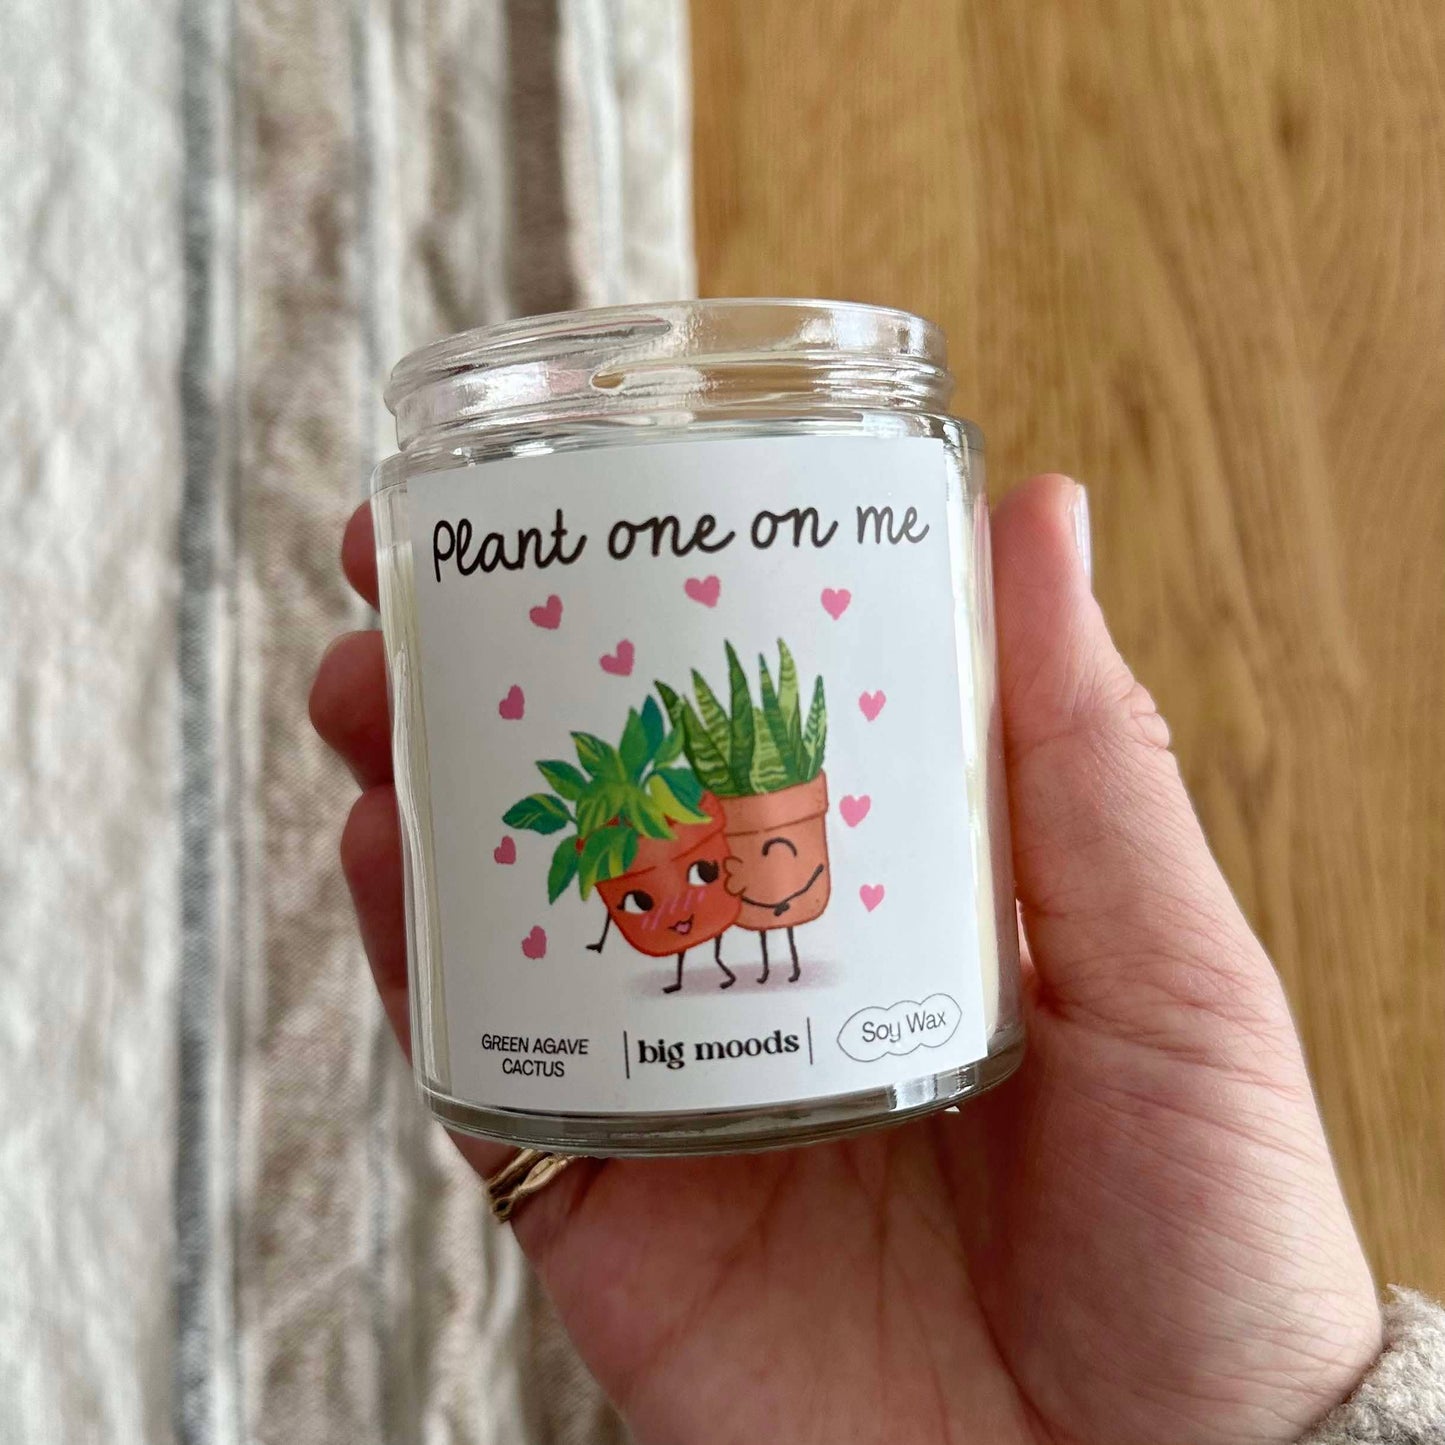 "Plant One On Me" Green Agave Cactus  - 5oz Soy Candle